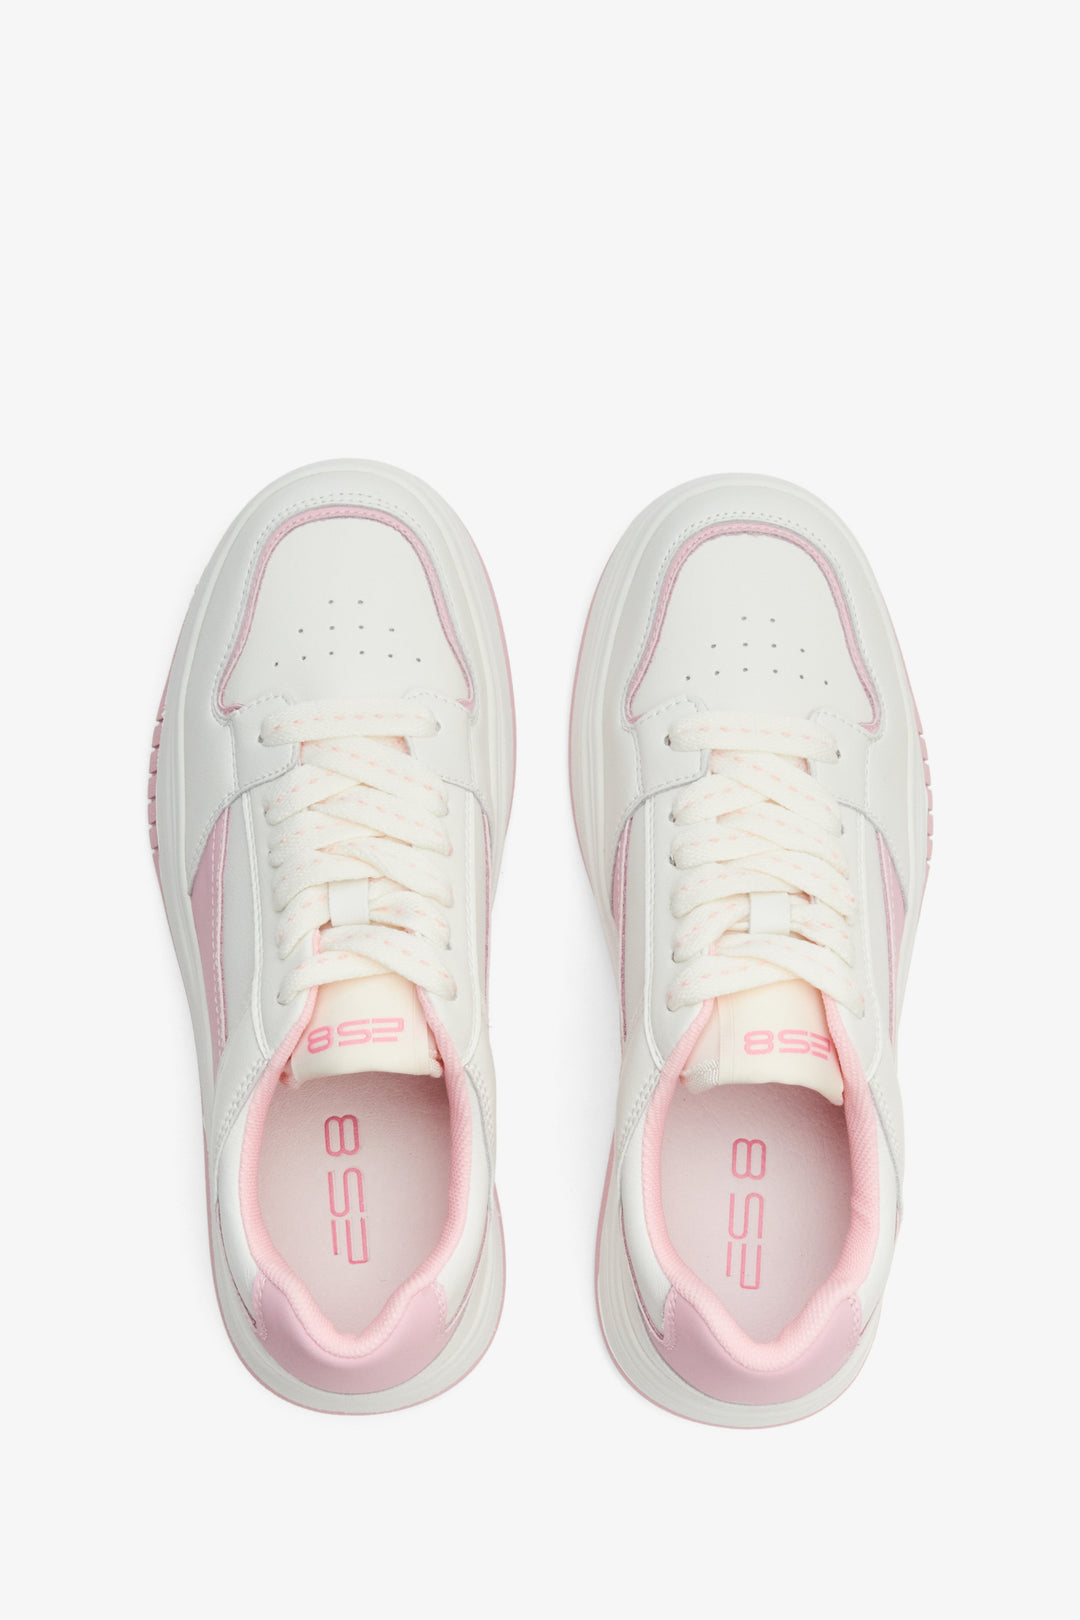 Women's white and pink leather sneakers ES 8 - presentation of the footwear from above.